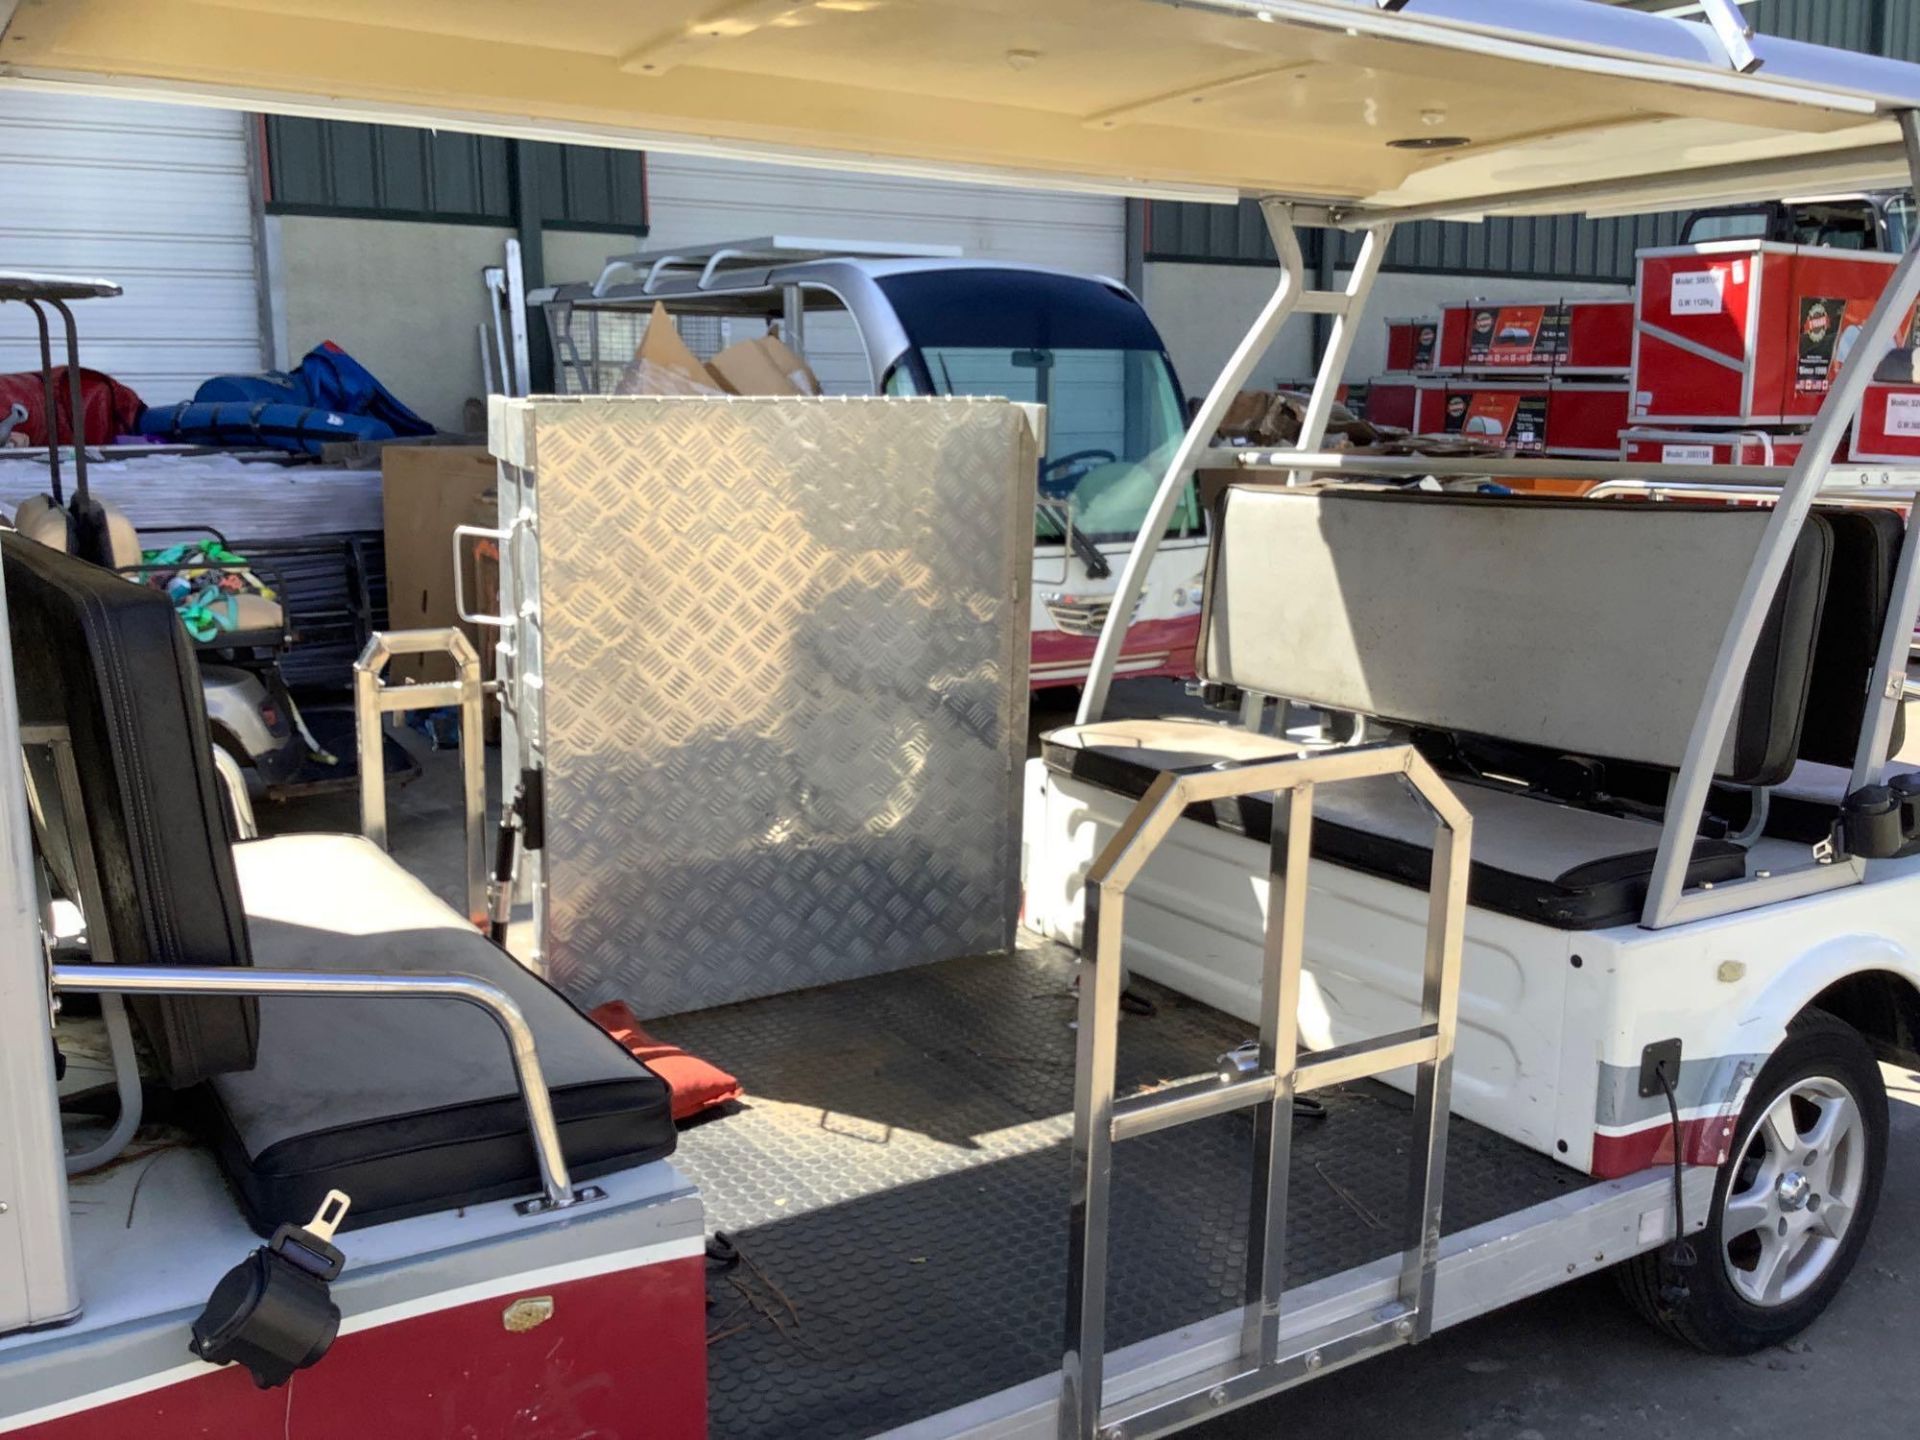 2015 STAR EV SHUTTLE CART MODEL STAR-BN72-11-AC-WHEELCHAIR, ELECTRIC, SOLA PANEL ATTACHED, DOME LIGH - Image 16 of 29